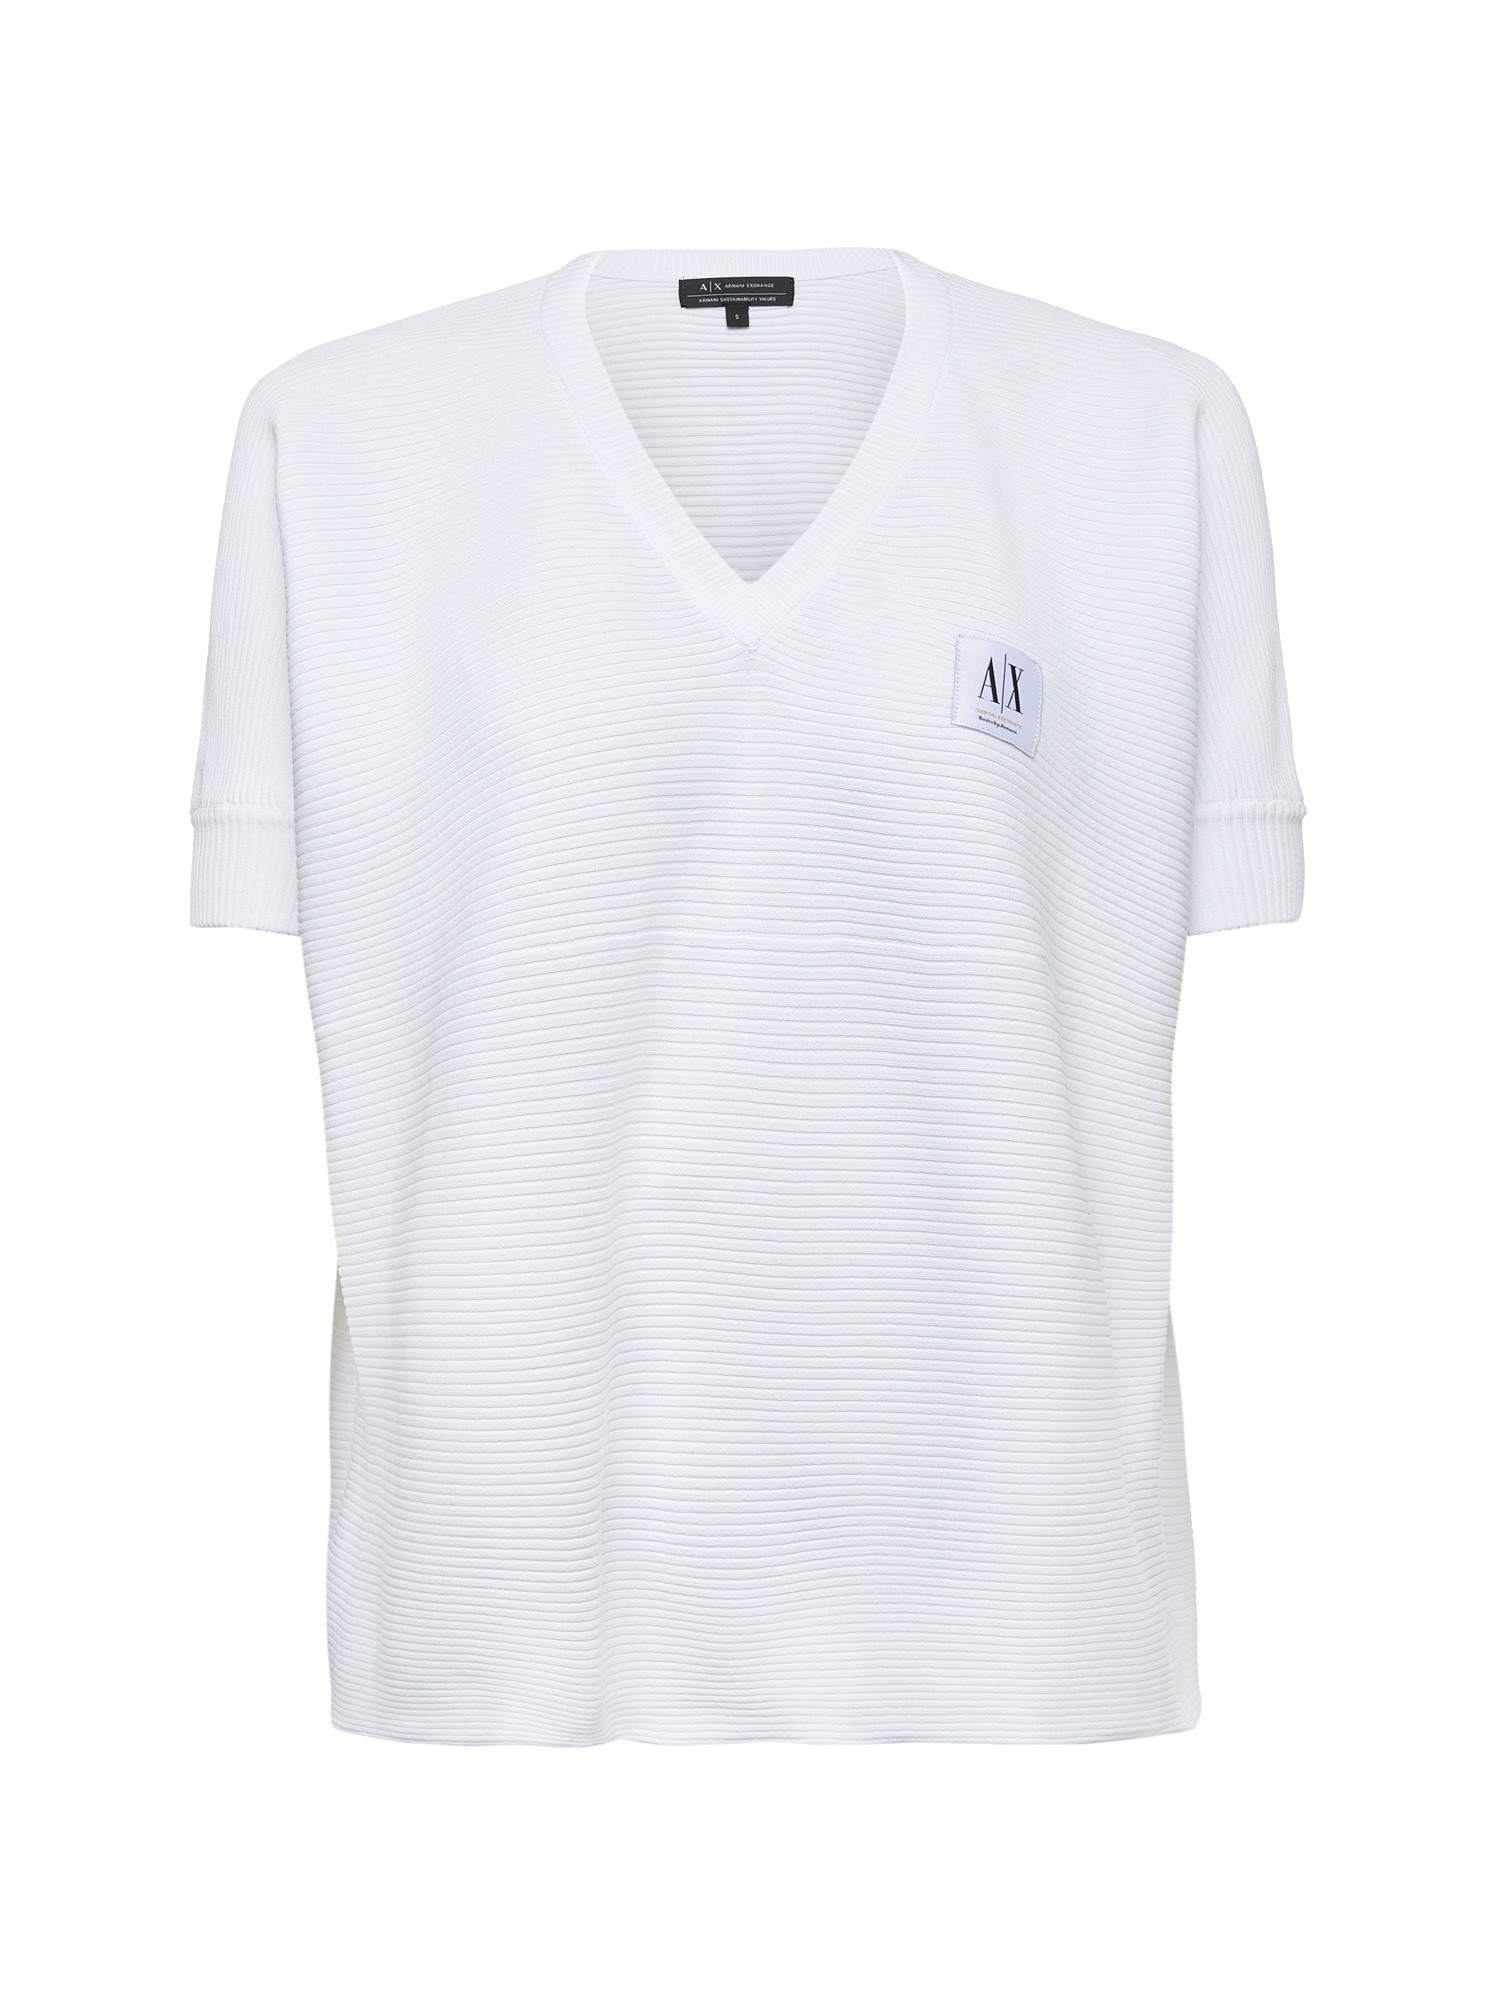 Armani Exchange - Maglione a costine con logo, Bianco, large image number 0